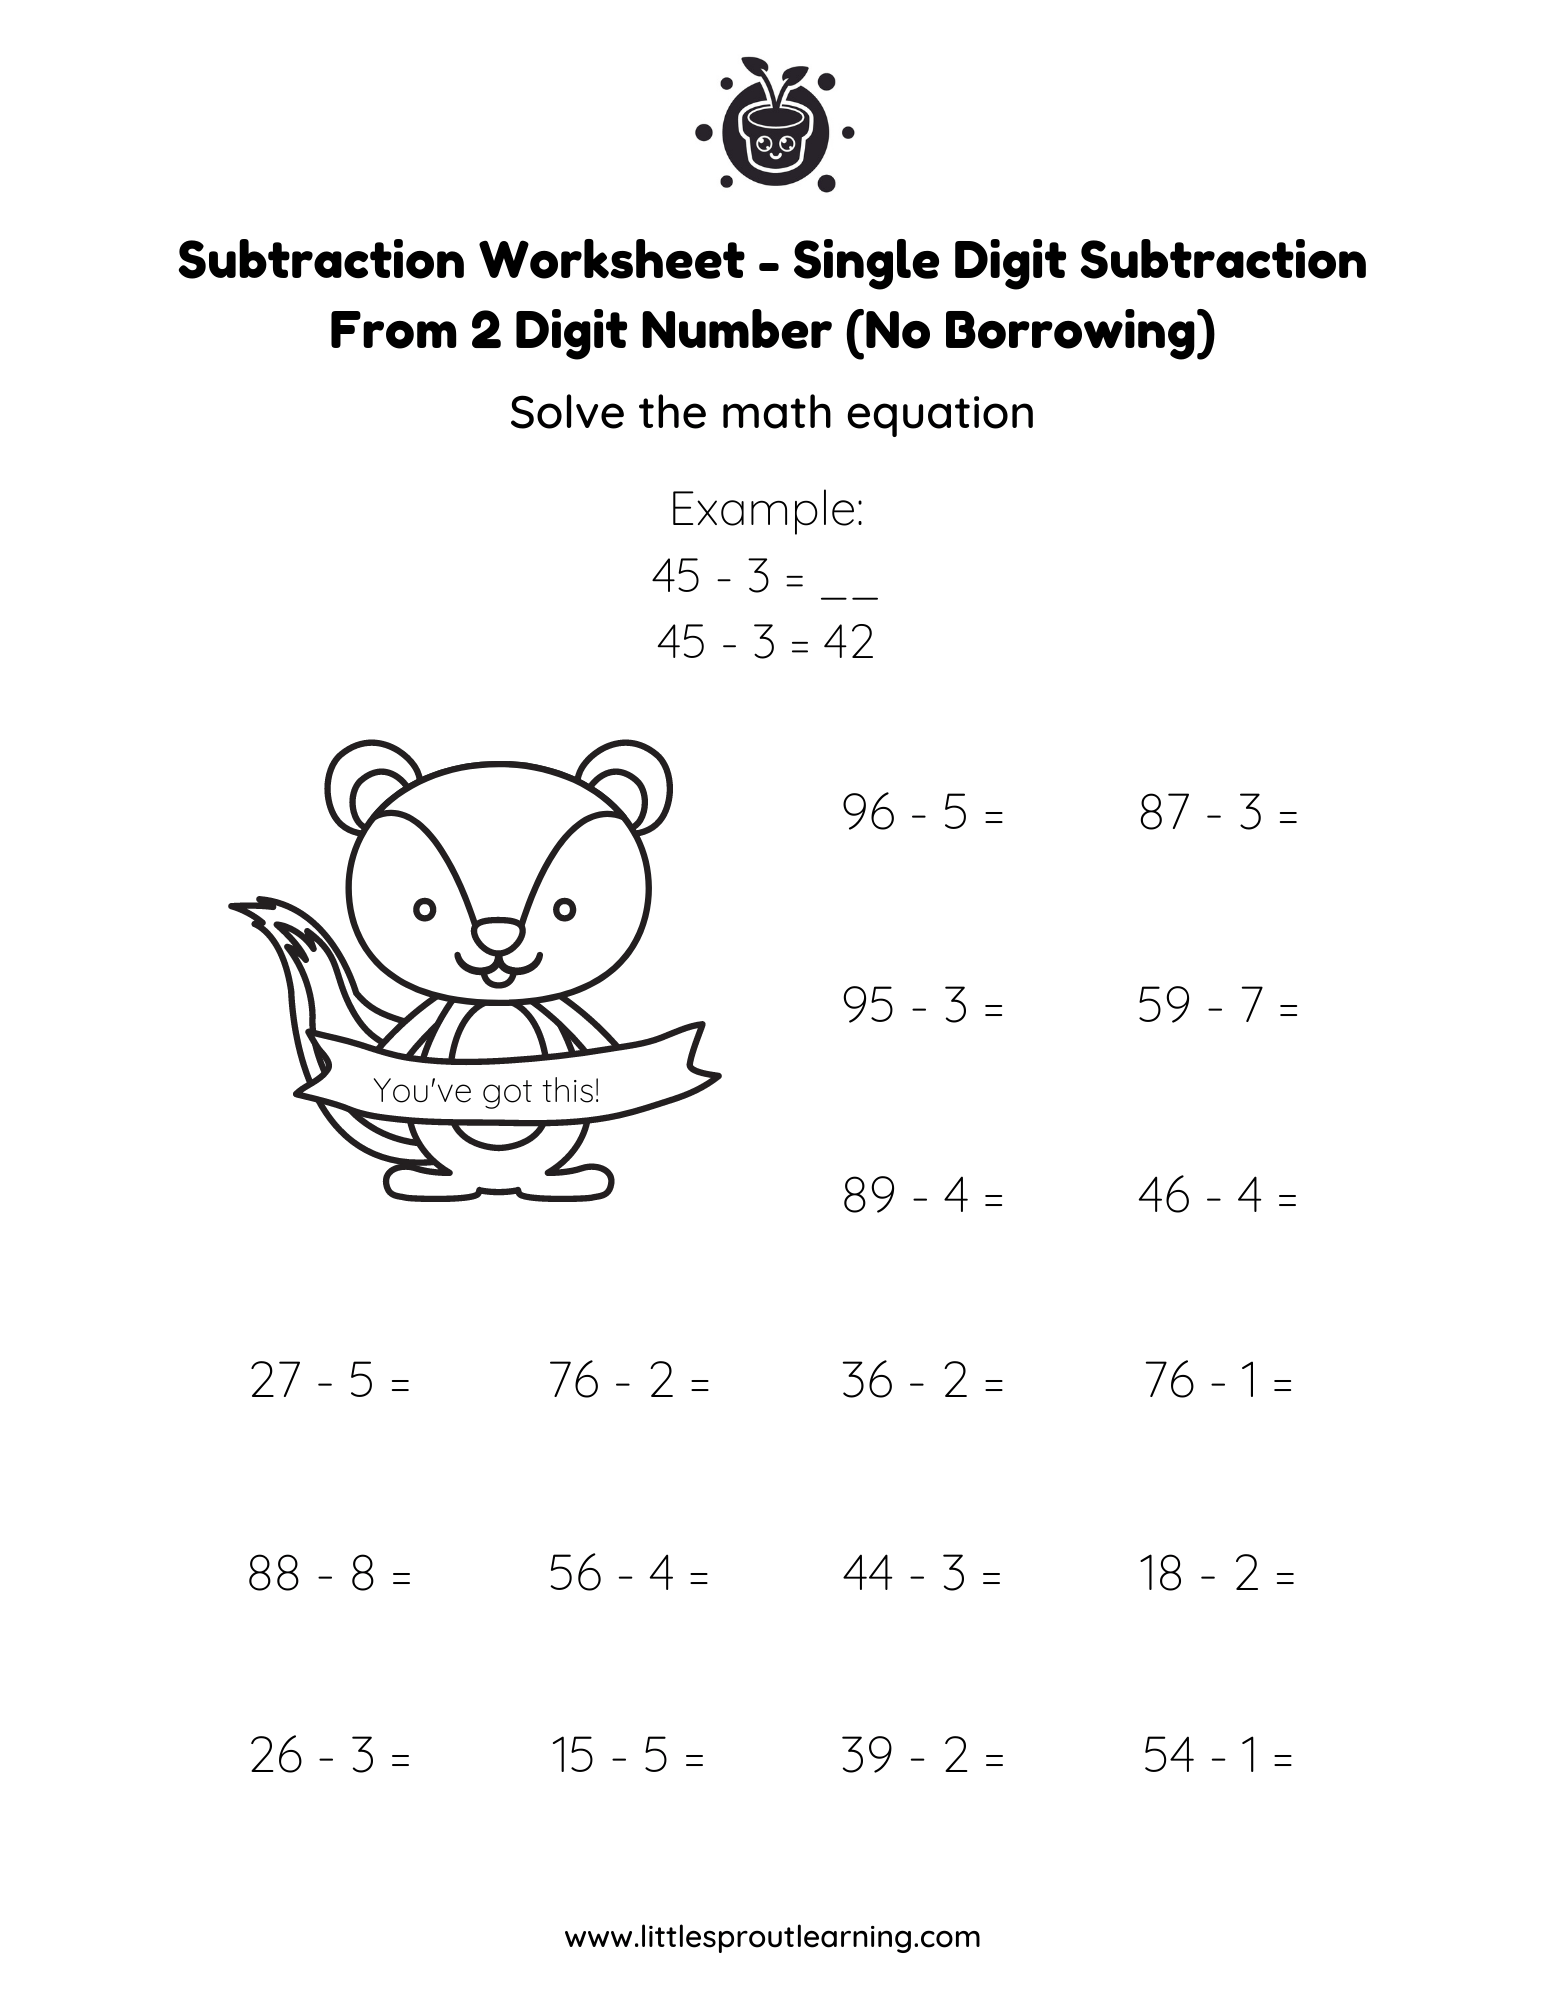 Single Digit Subtraction From 2 Digit Numbers